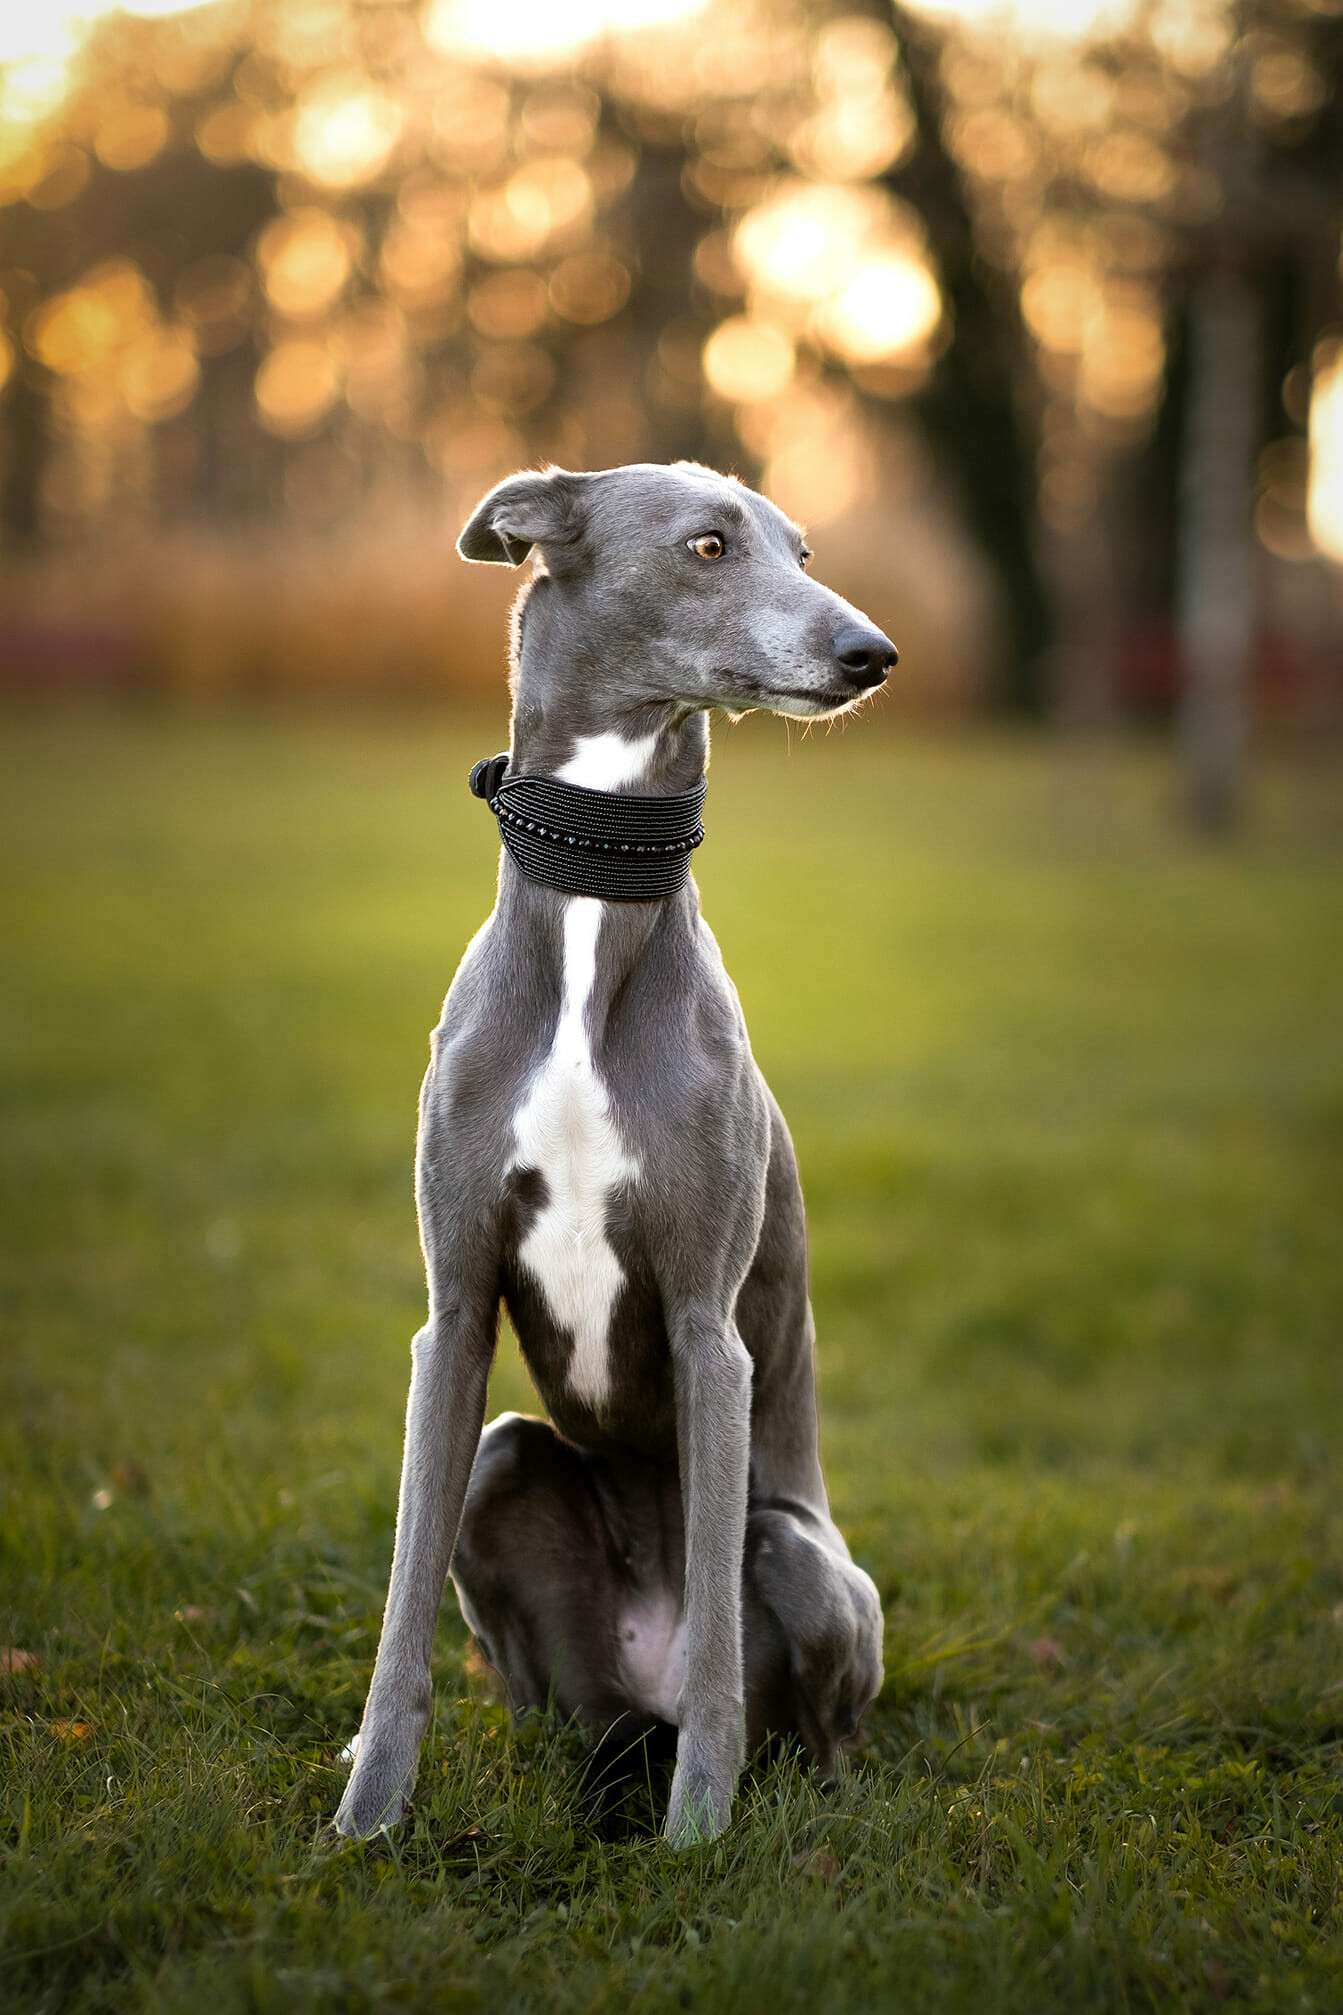 Whippet Dog: Today the breed competes in agility, flyball, lure coursing, rally, and obedience and is a loving therapy animal. 1350x2020 HD Wallpaper.